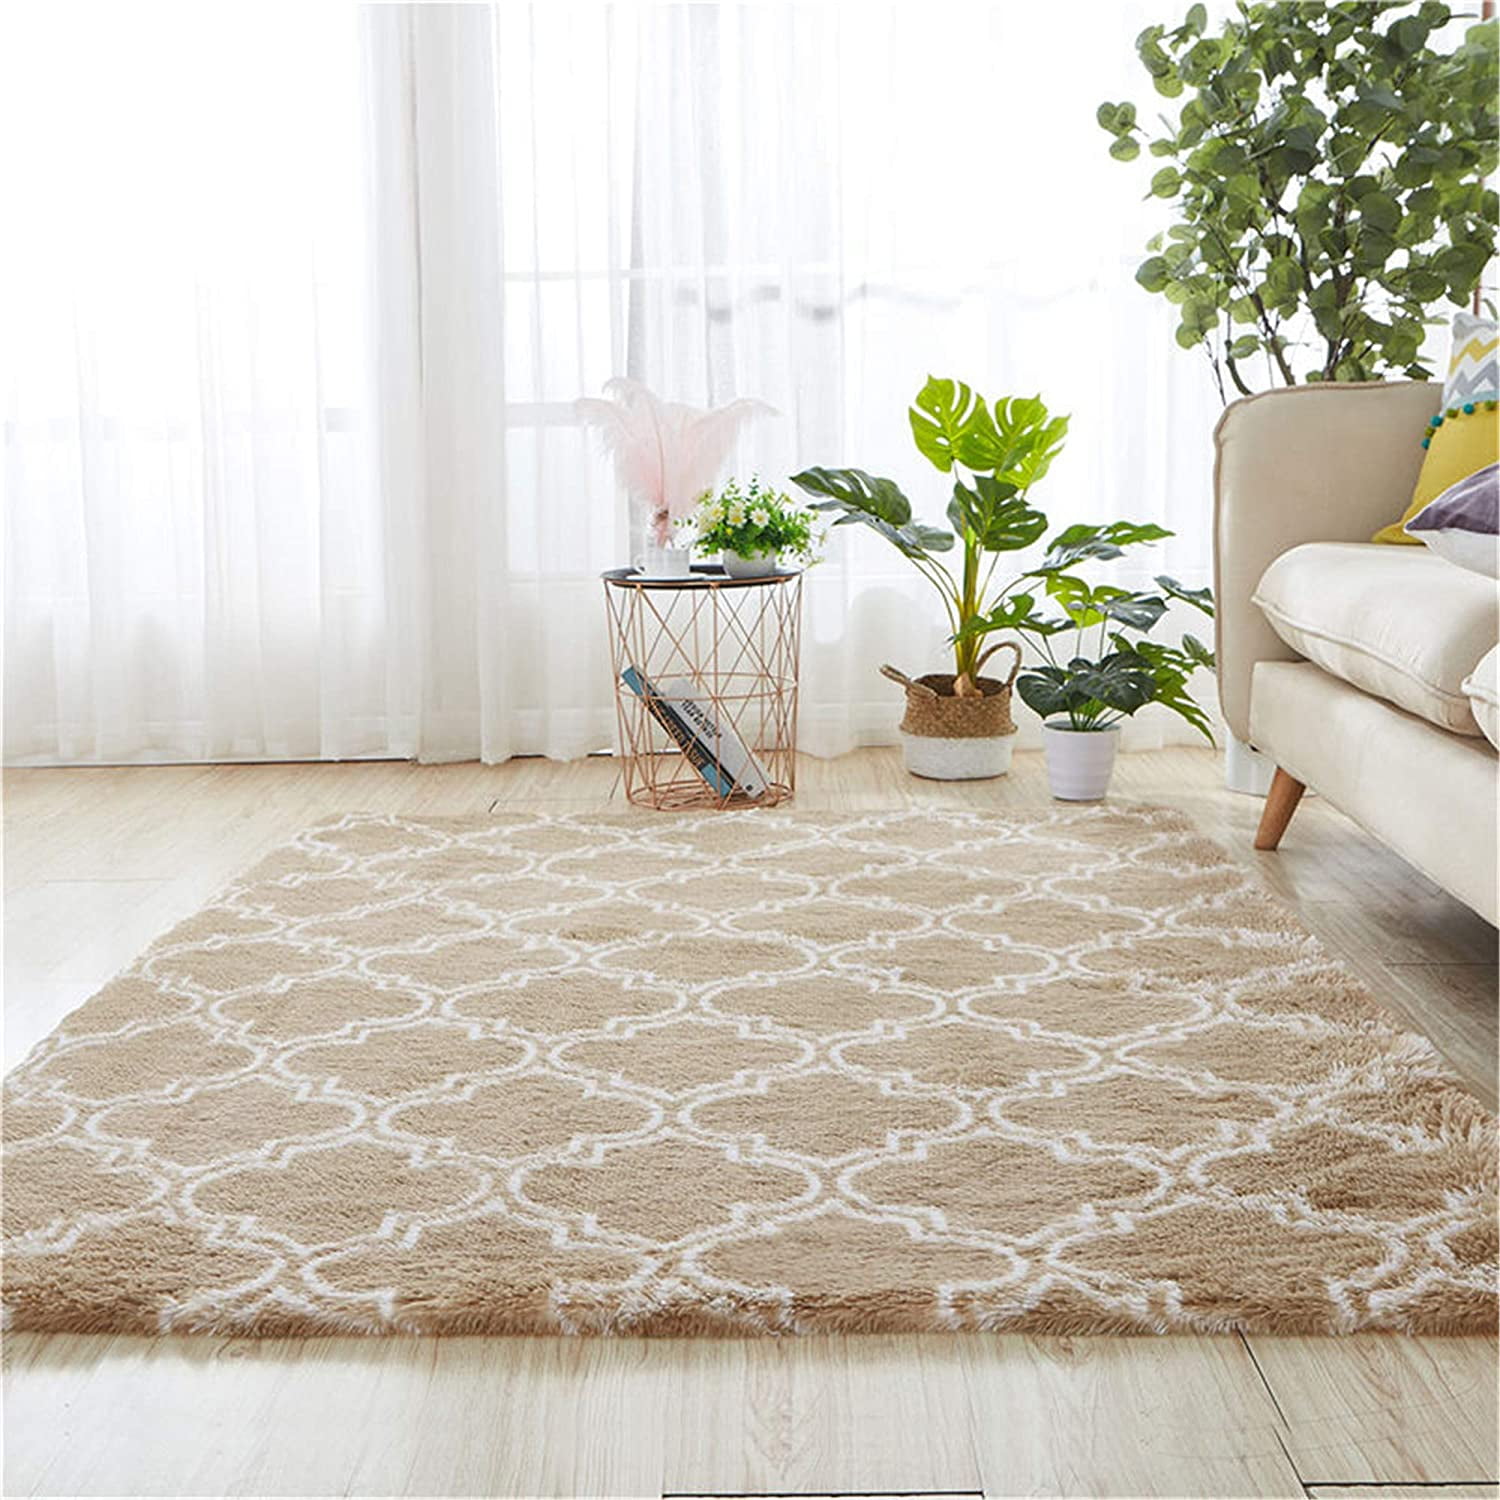  Green Layers Area Rug, Modern Washable Rugs, Decorative Rug Non  Slip Machine Washable for Living Room Bedroom Dining Room Office Under  Kitchen Table Apartment Indoor Hardwood Floors Decor-2ft×3ft : Home 